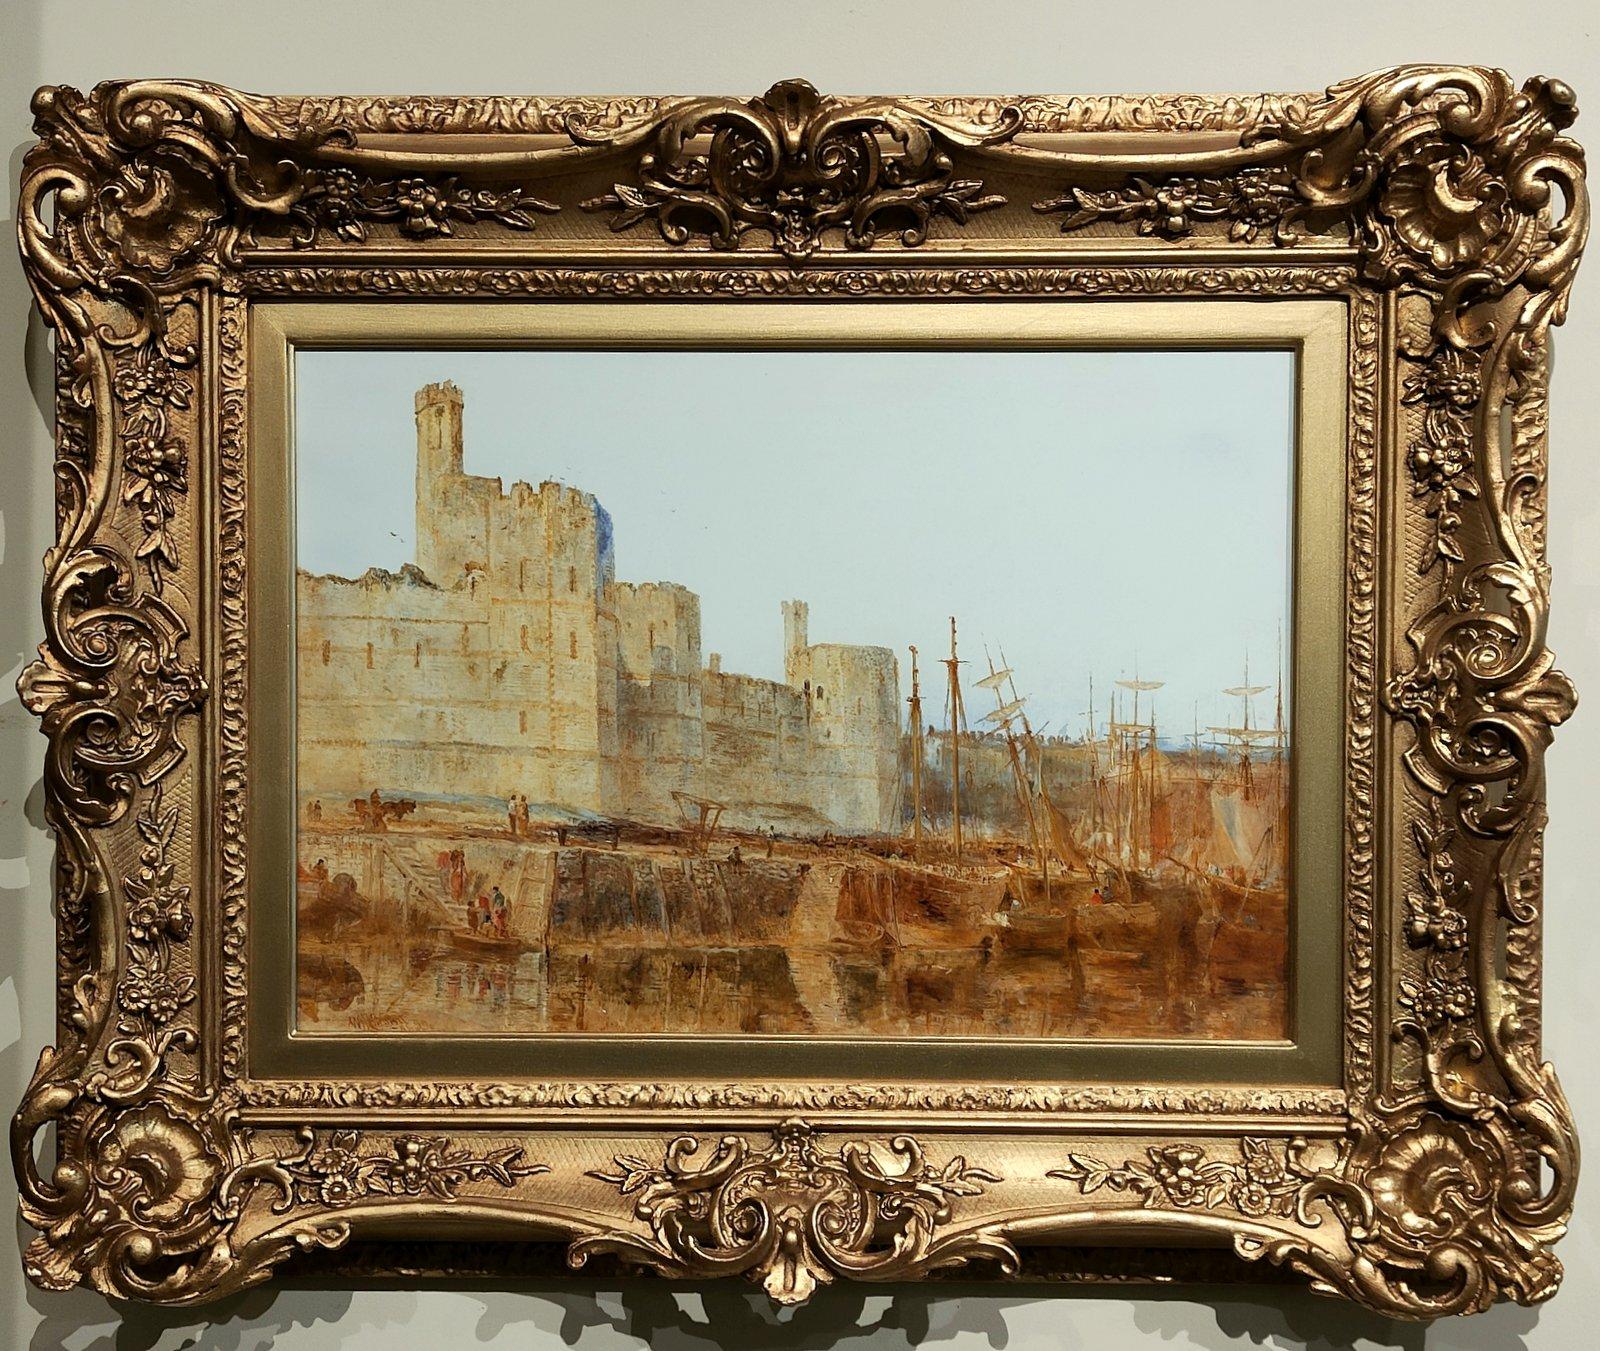 Oil Painting by William Joseph J.C.Bond "Carmarvon Castle" flourished 1833 -1928 Popular Liverpool painter of coastal marines, much influenced by Turner. Regular exhibitor at the Royal Academy and Walker Art Gallery. Oil on panel. Signed.